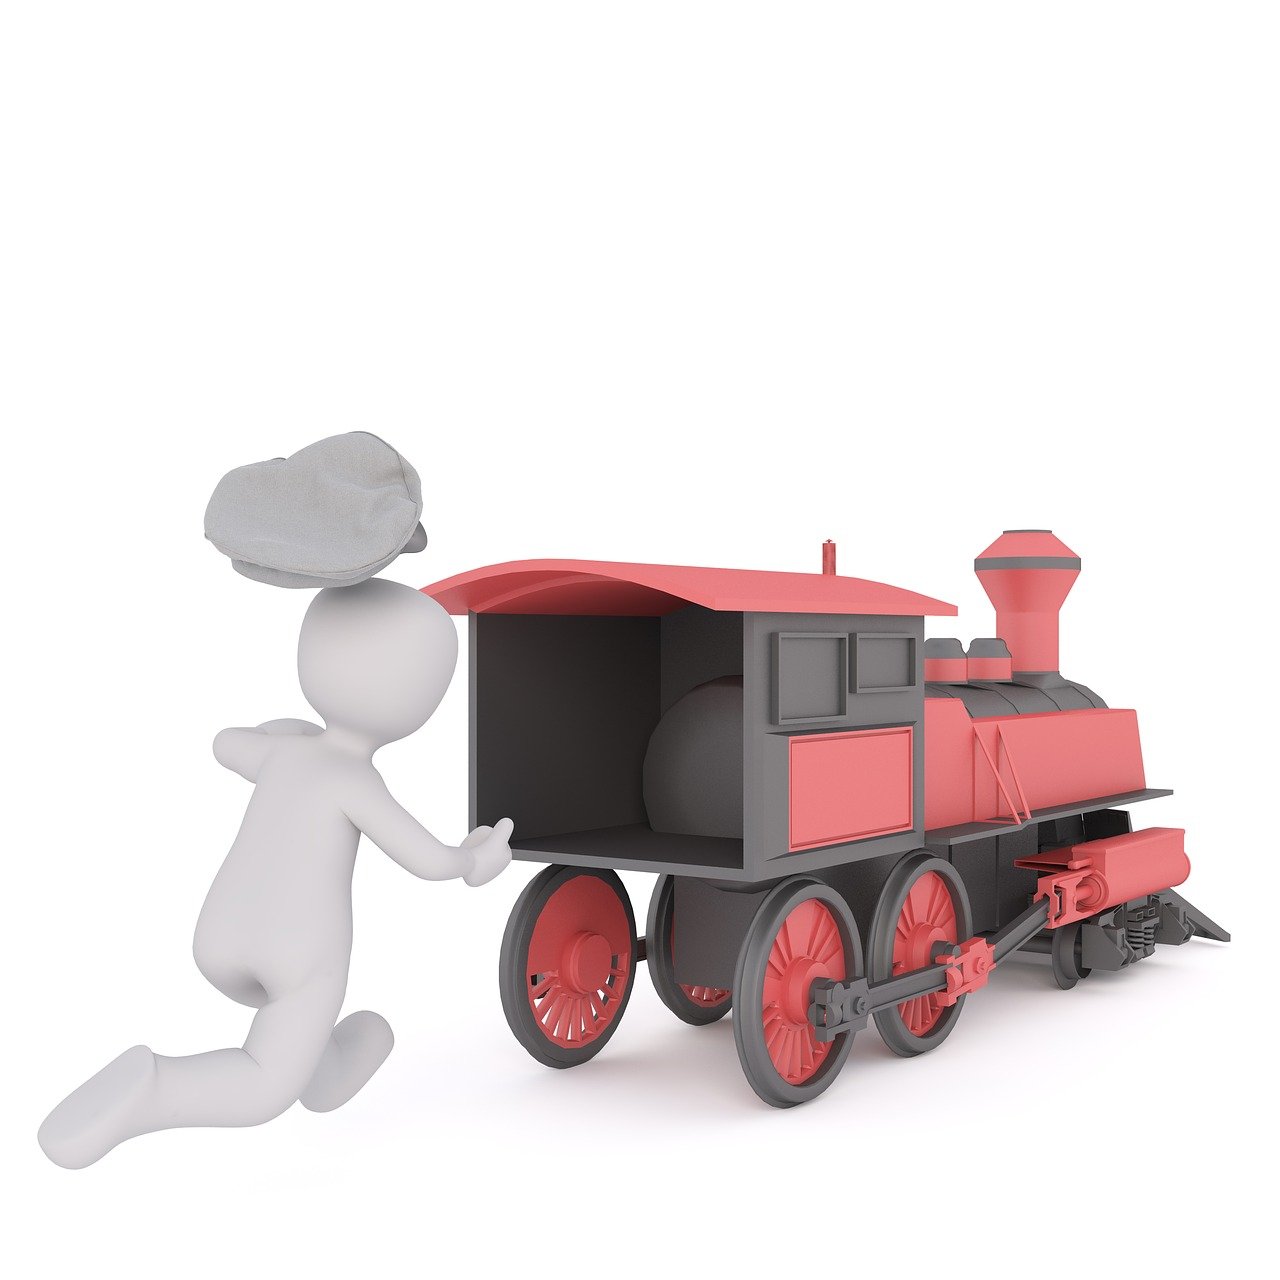 a man that is standing next to a train, a 3D render, inspired by Jean Tabaud, postman pat, white steam on the side, toy photo